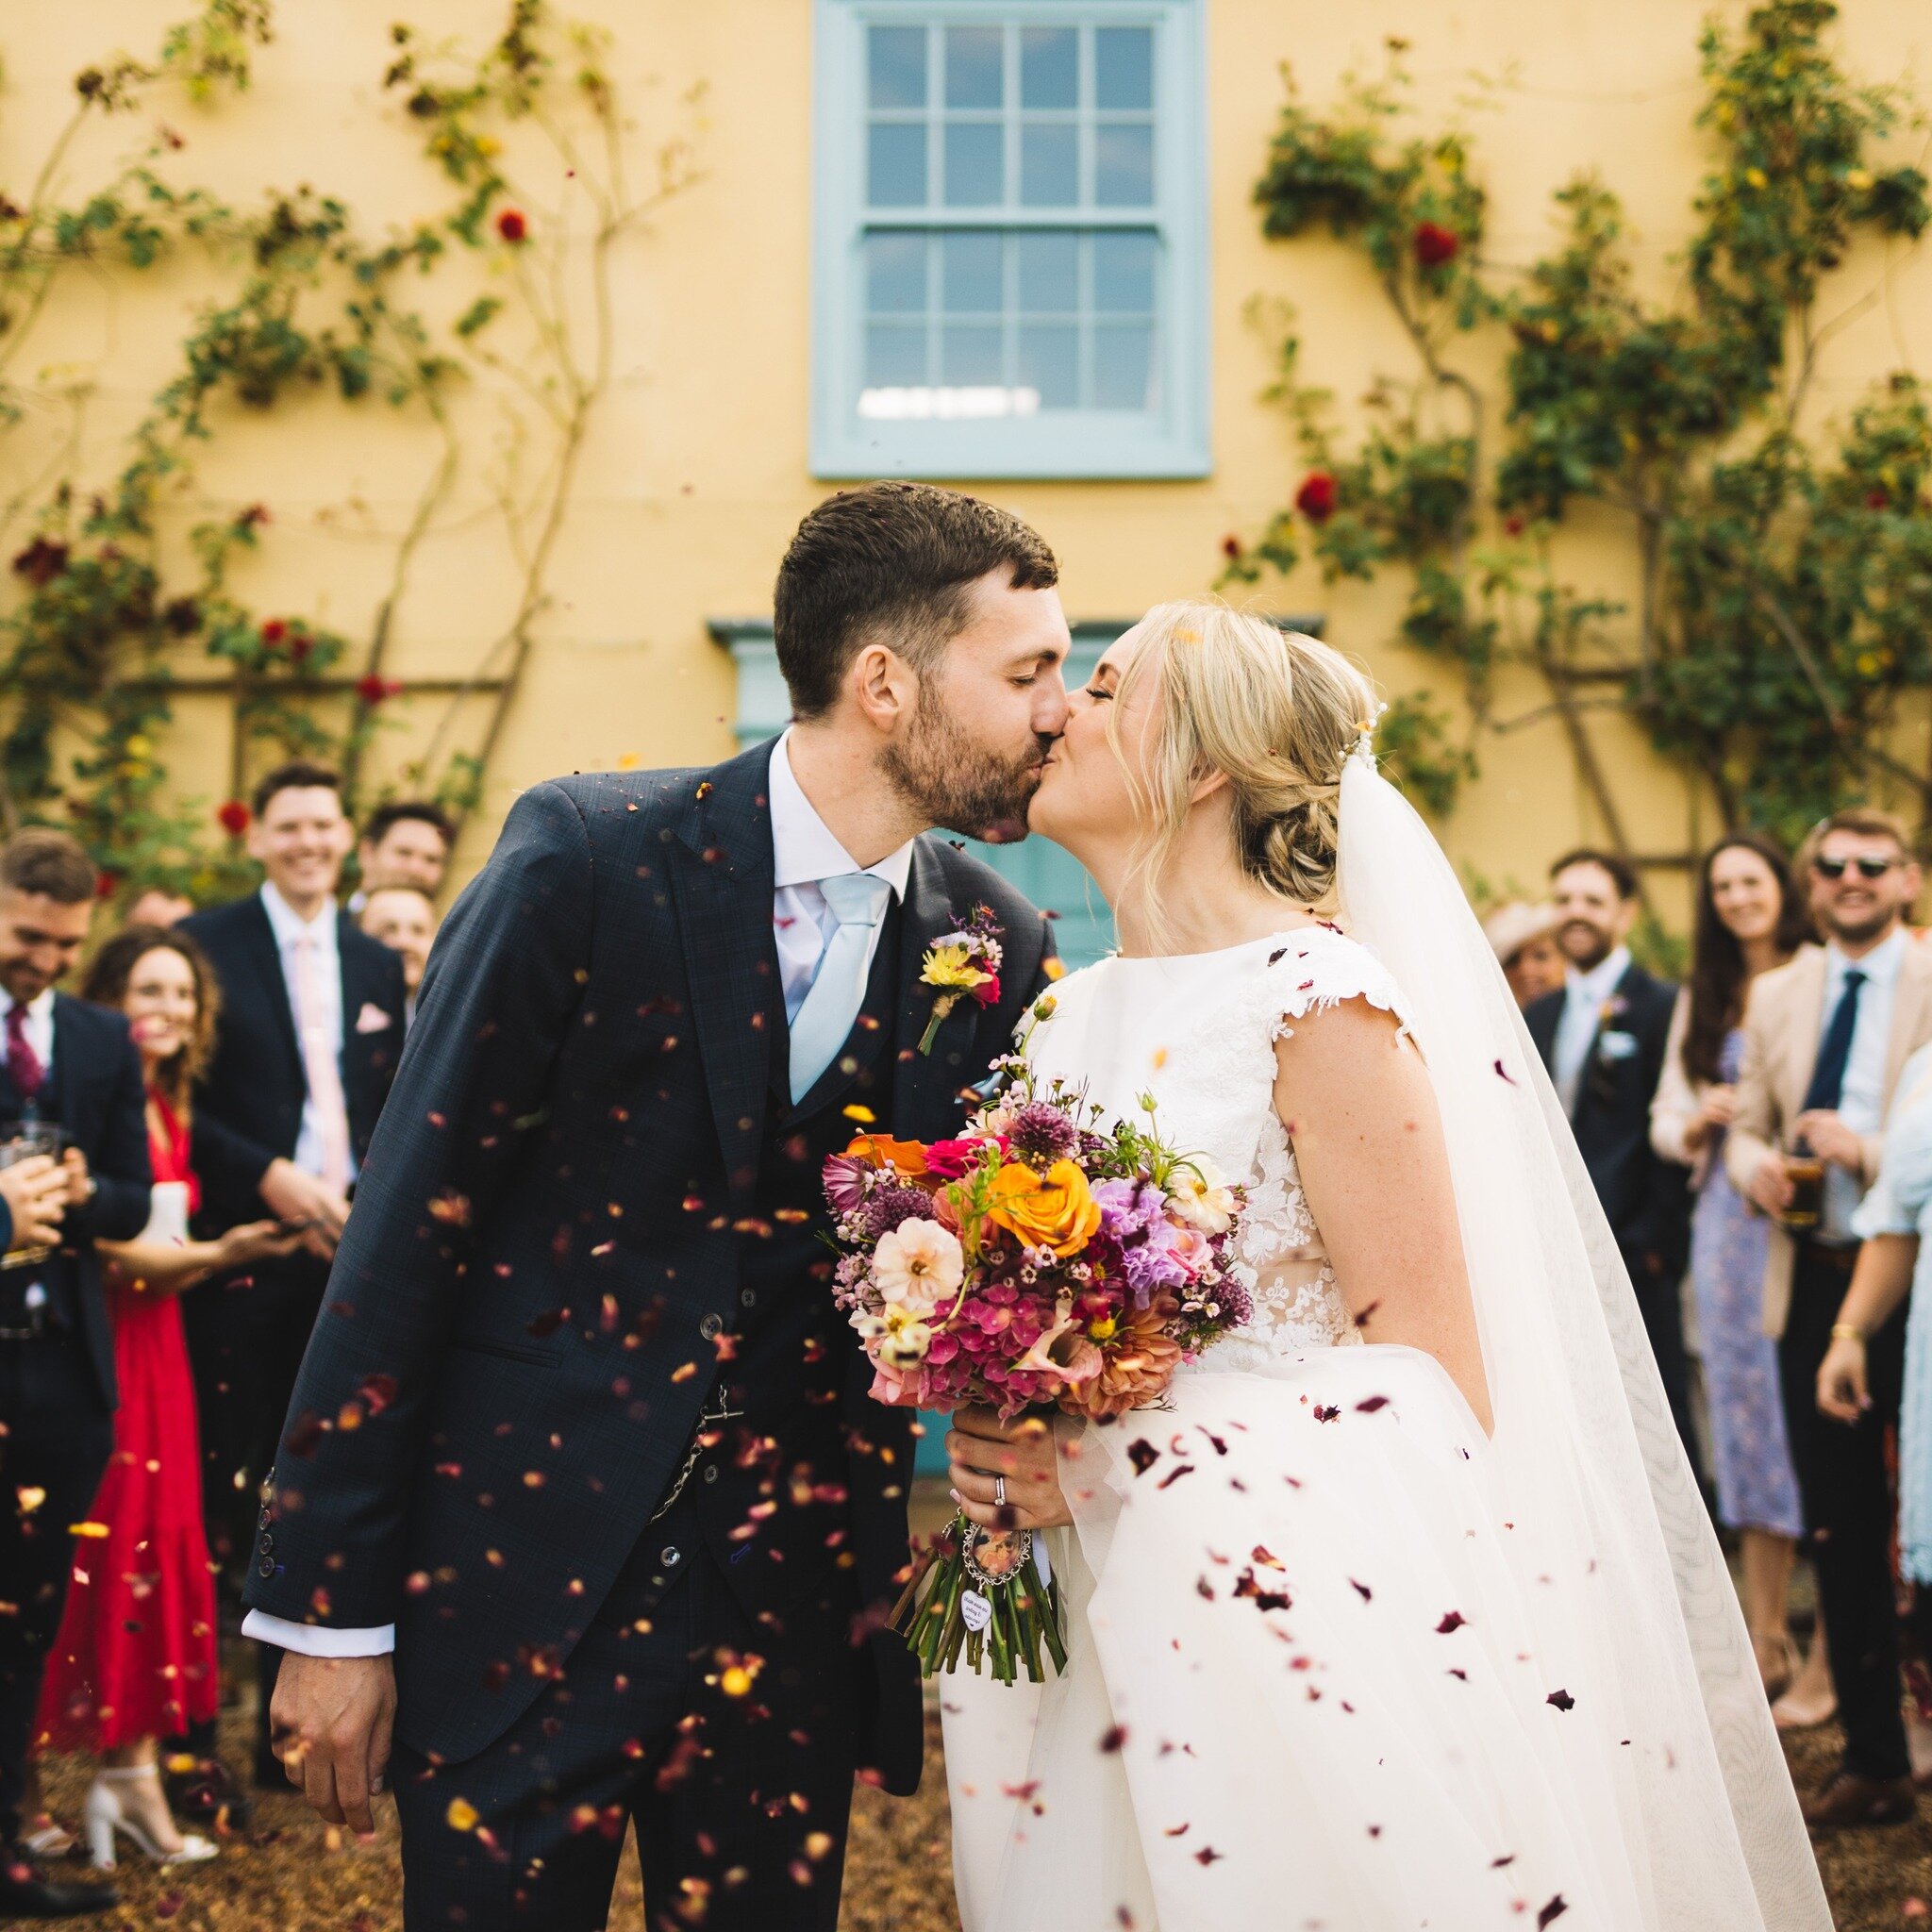 A colourful confetti moment with Laura &amp; Marcus in front of the blue doors.. the classic South Farm shot! 💛

Venue: @southfarm1 
Dress: @harveysoframsey 
Suit: @sousterandhicks 
Flowers: @willowandwreathflorist
Hair: @bellarosehairdesign 
Makeup